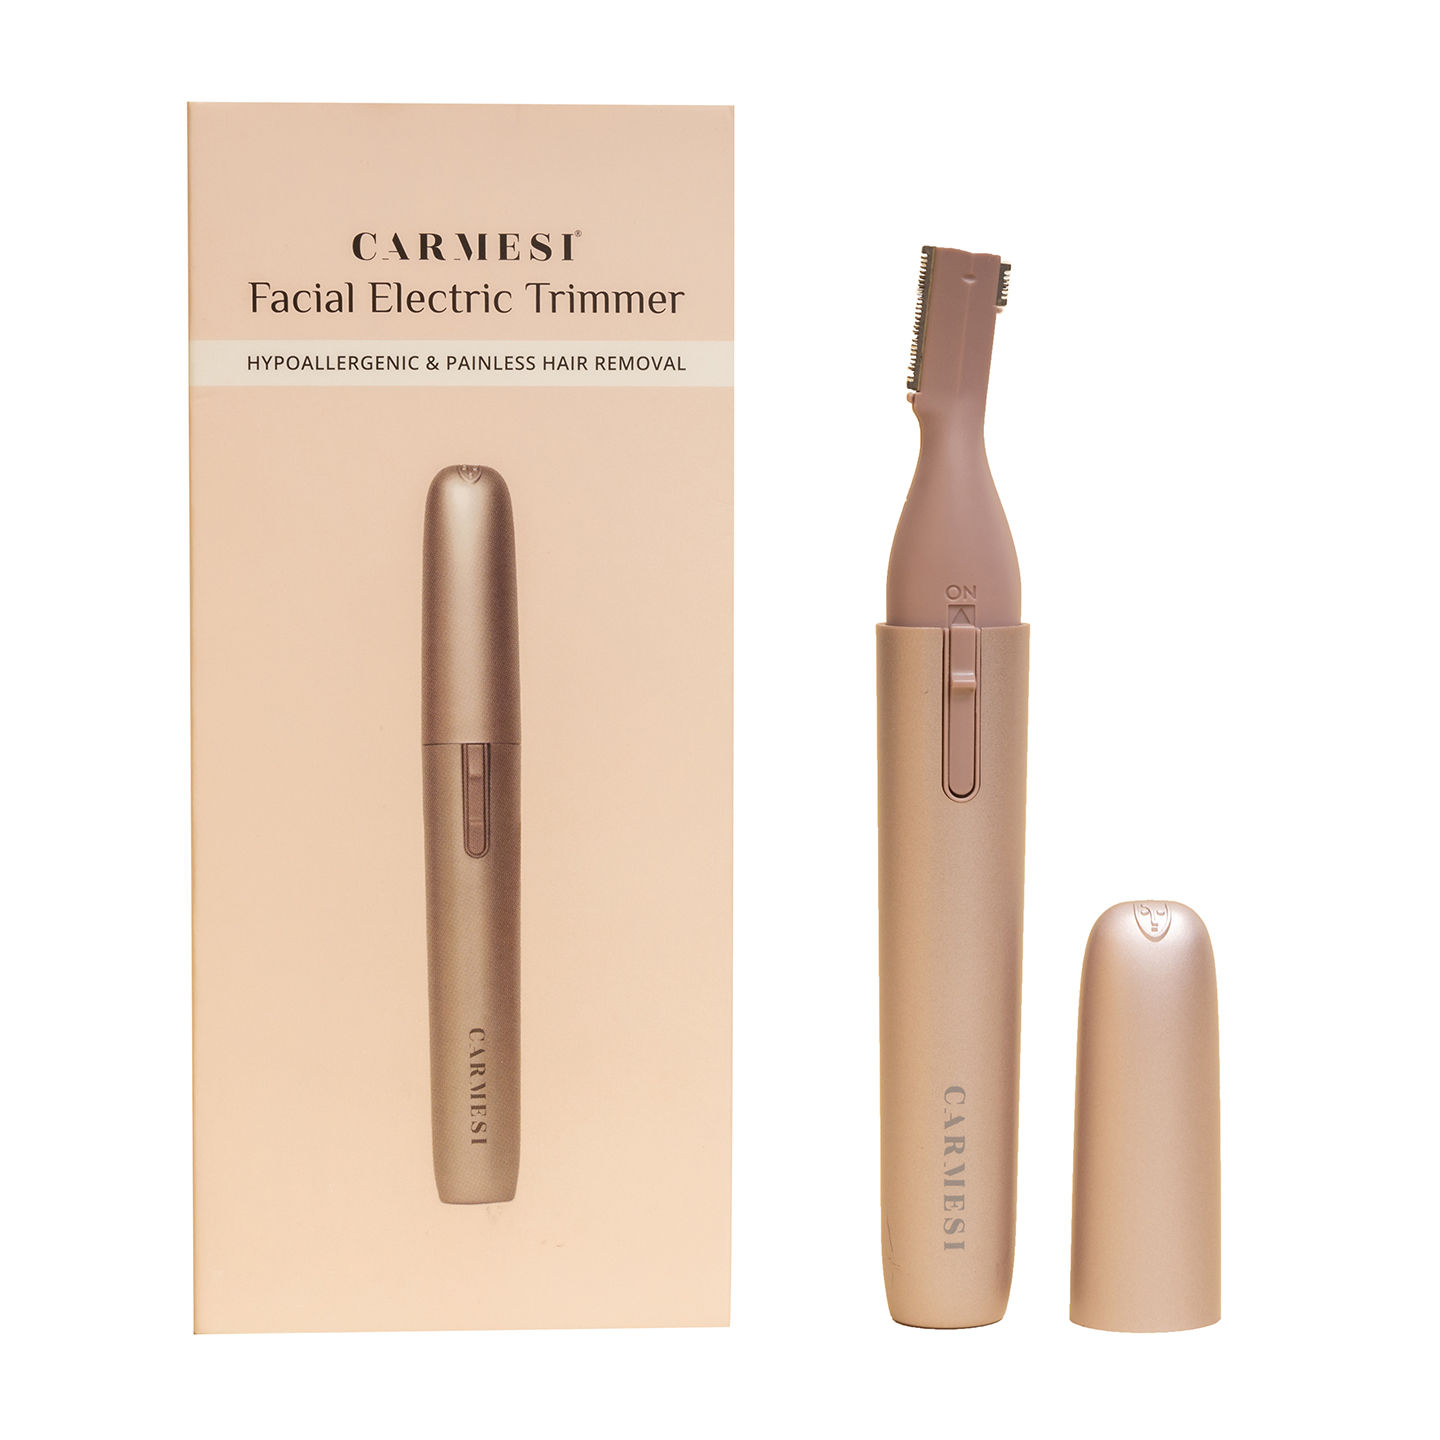 Carmesi Facial Electric Trimmer For Women Hypoallergenic & Painless Hair Removal Eyebrow Comb